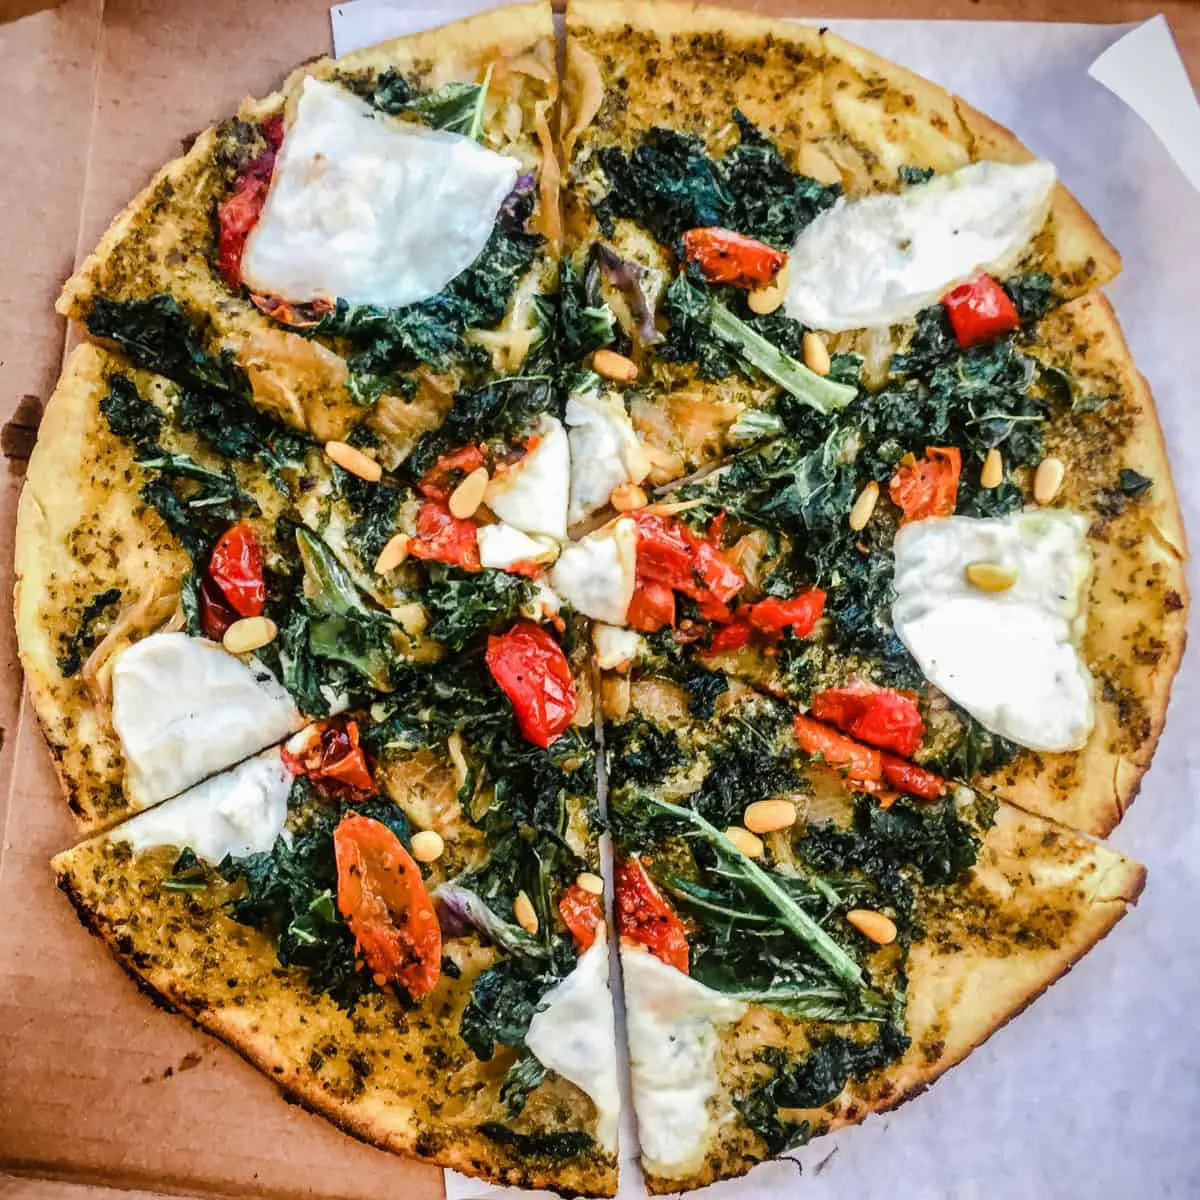 Overhead shot of pizza topped with vegan cheese, tomatoes, kale and pine nuts from Virtuous Pie Restaurant in Vancouver.